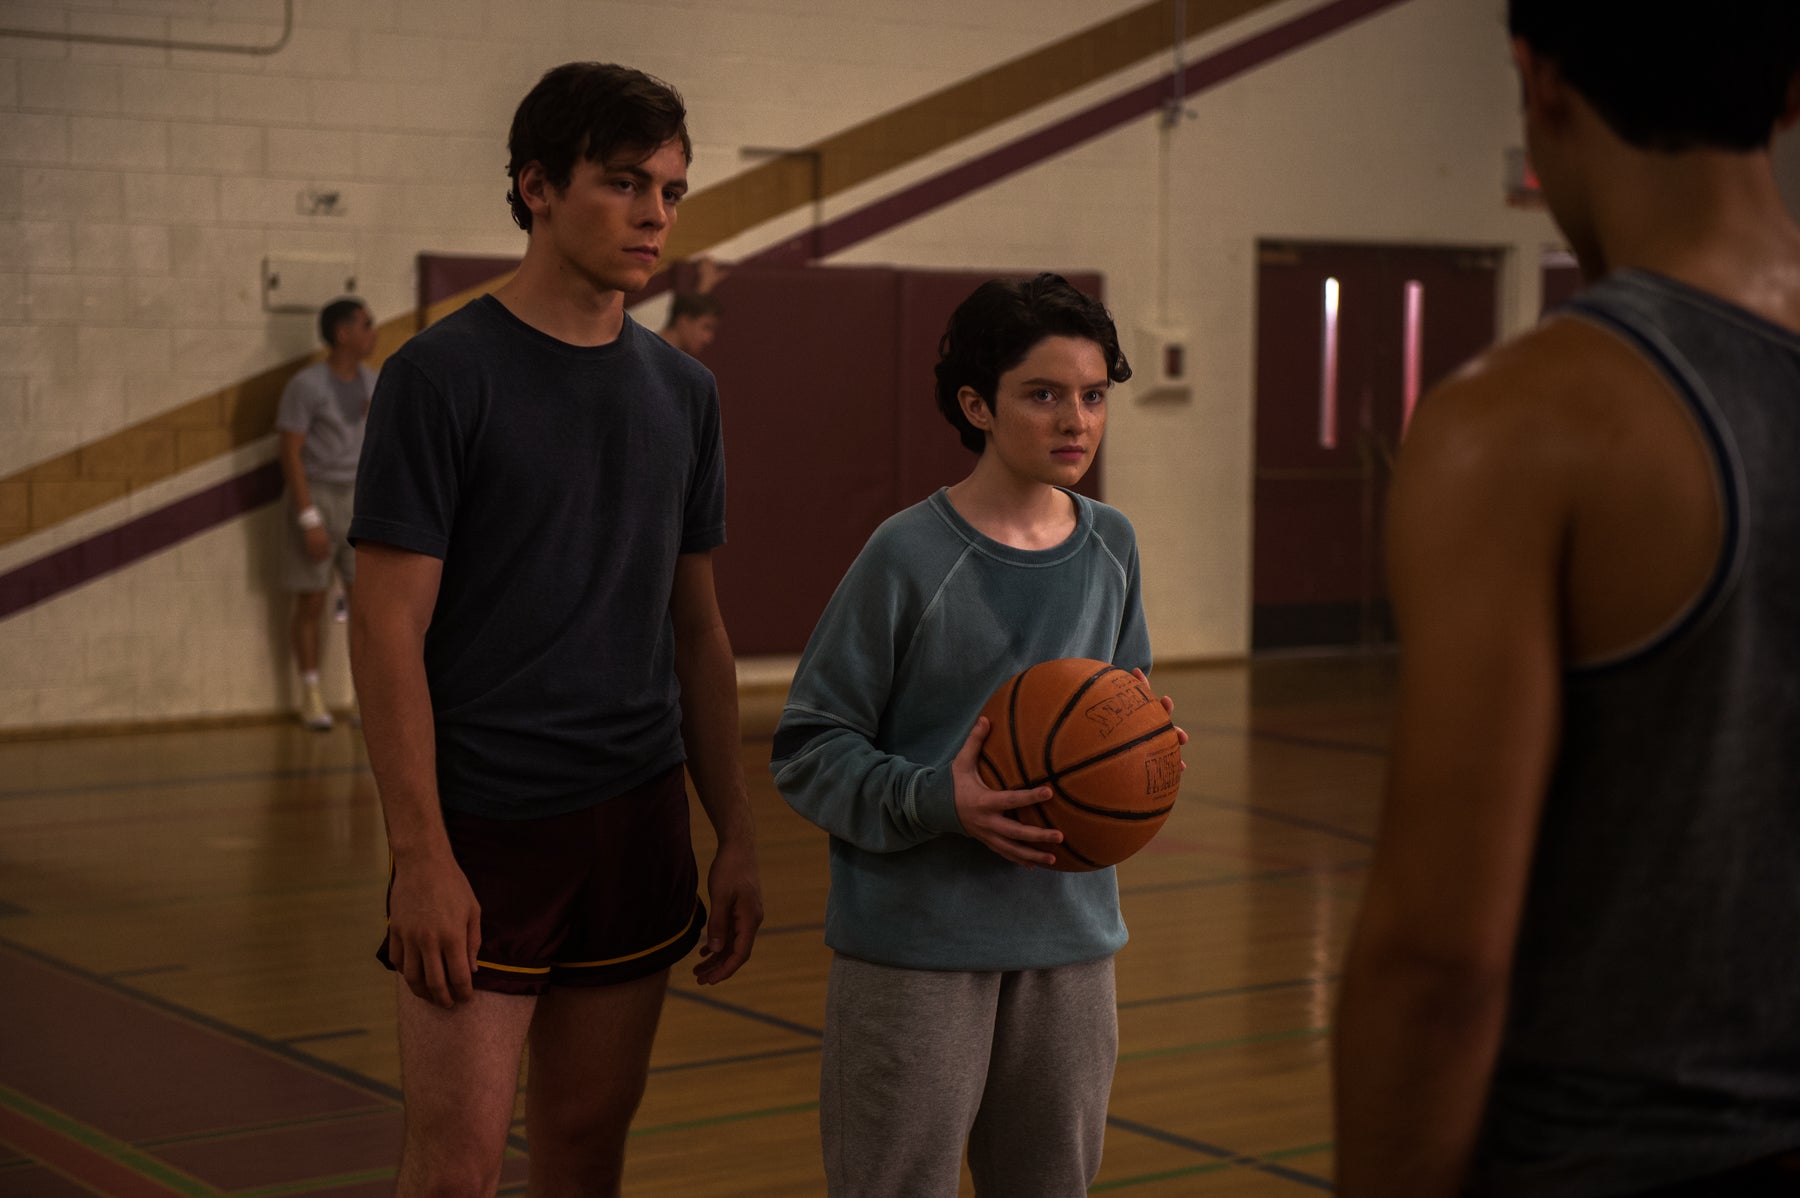 Harvey and Theo stand in the Greendale High gym, facing a character with his back turned. Theo is holding a basketball.